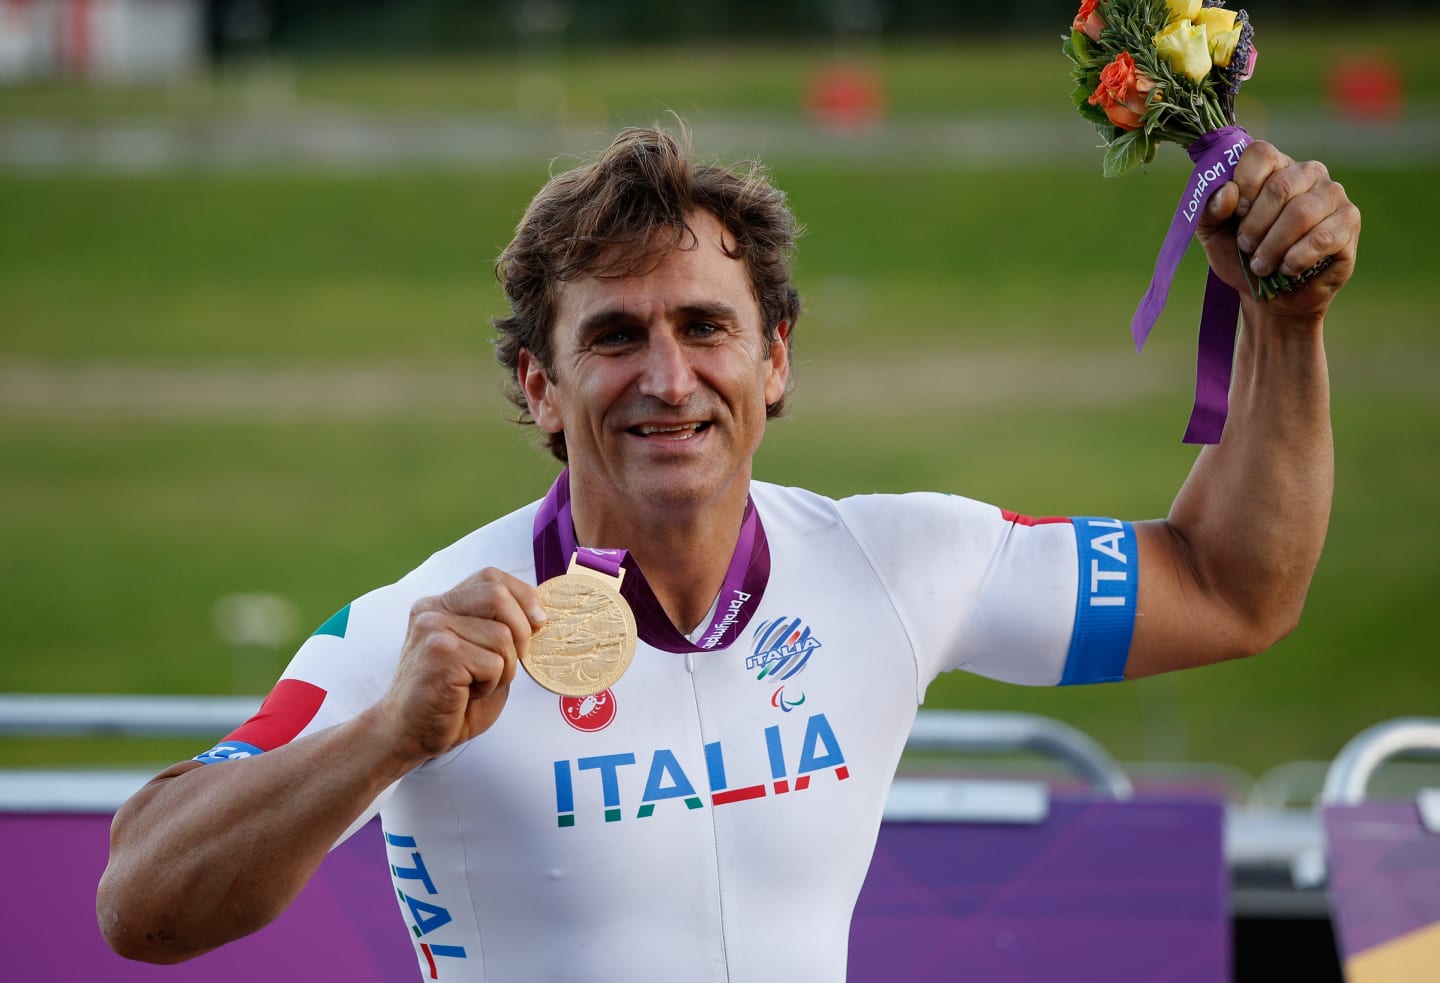 LONGFIELD, ENGLAND - SEPTEMBER 07:  Alessandro Zanardi of Italy poses with his Gold medal after